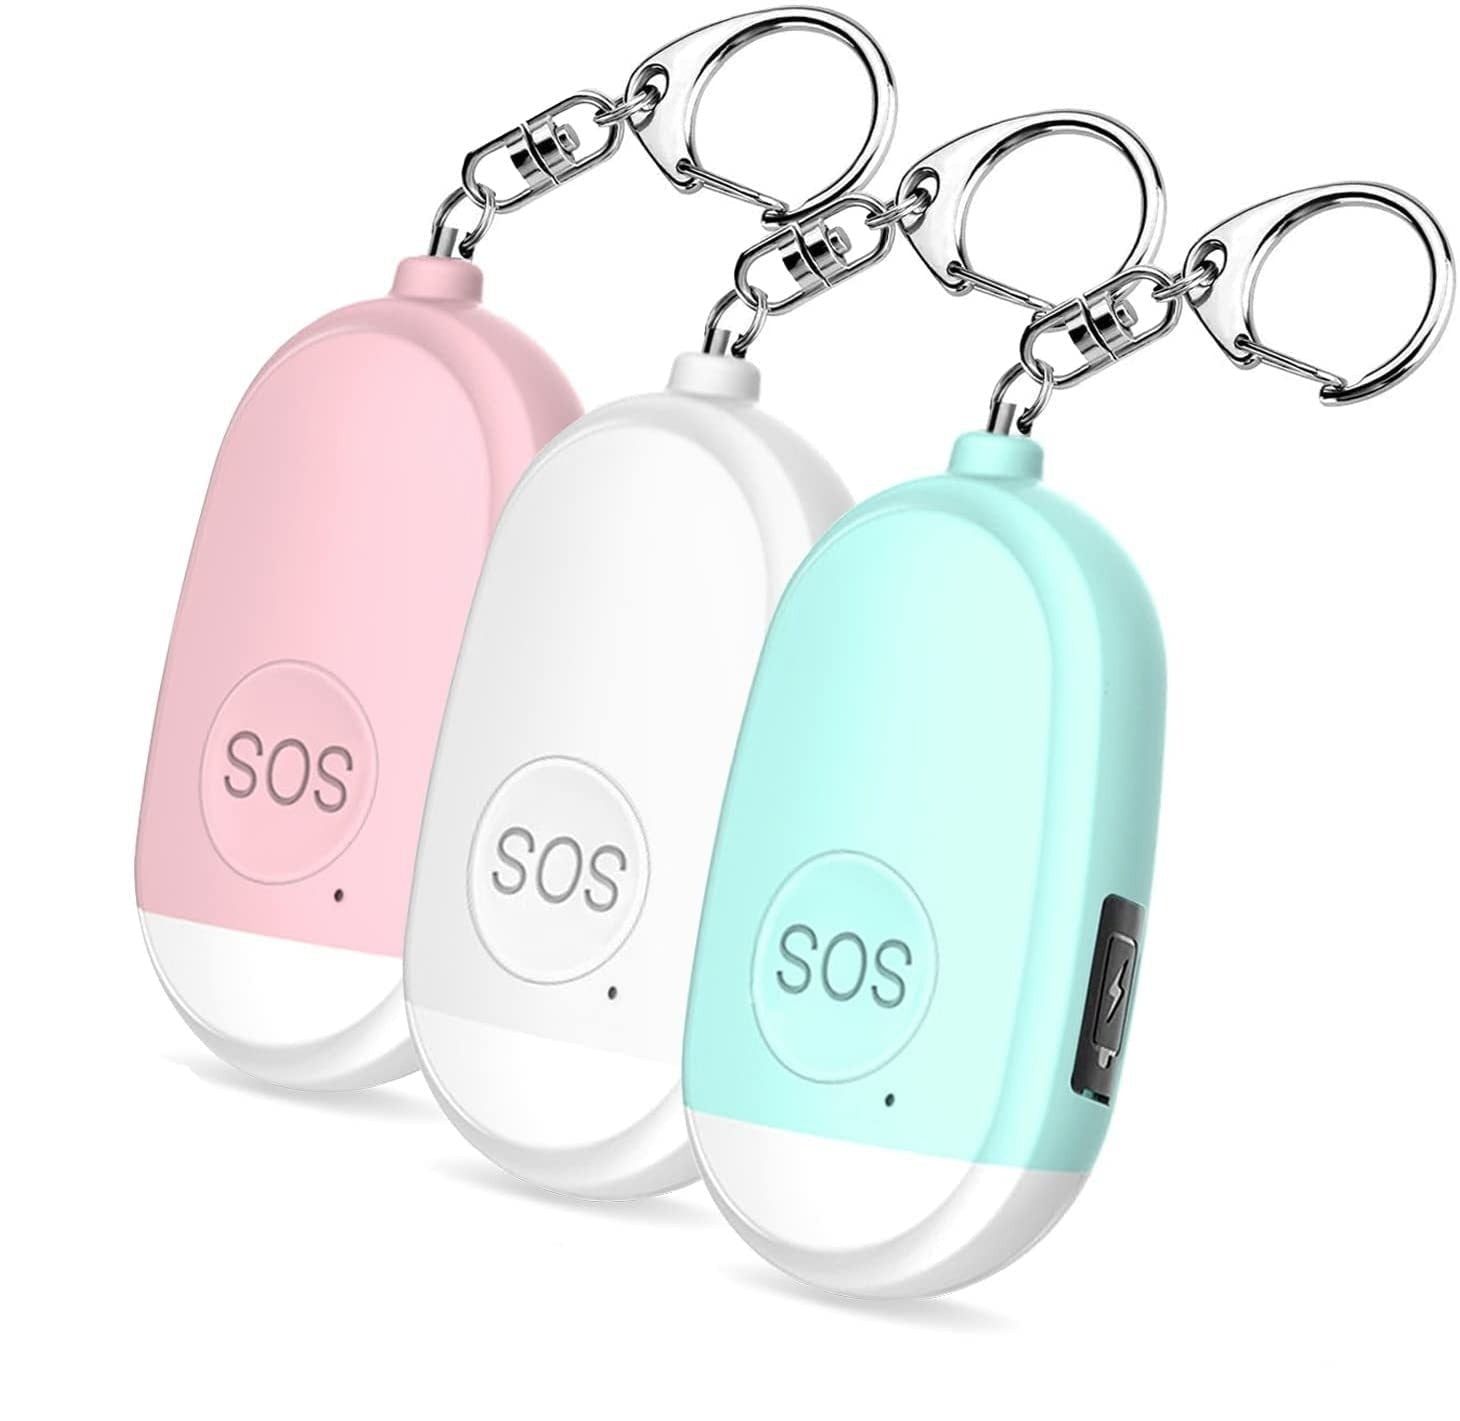 Mini SOS Personal Alarm Self Defense Keychain Pink White and Teal Colors